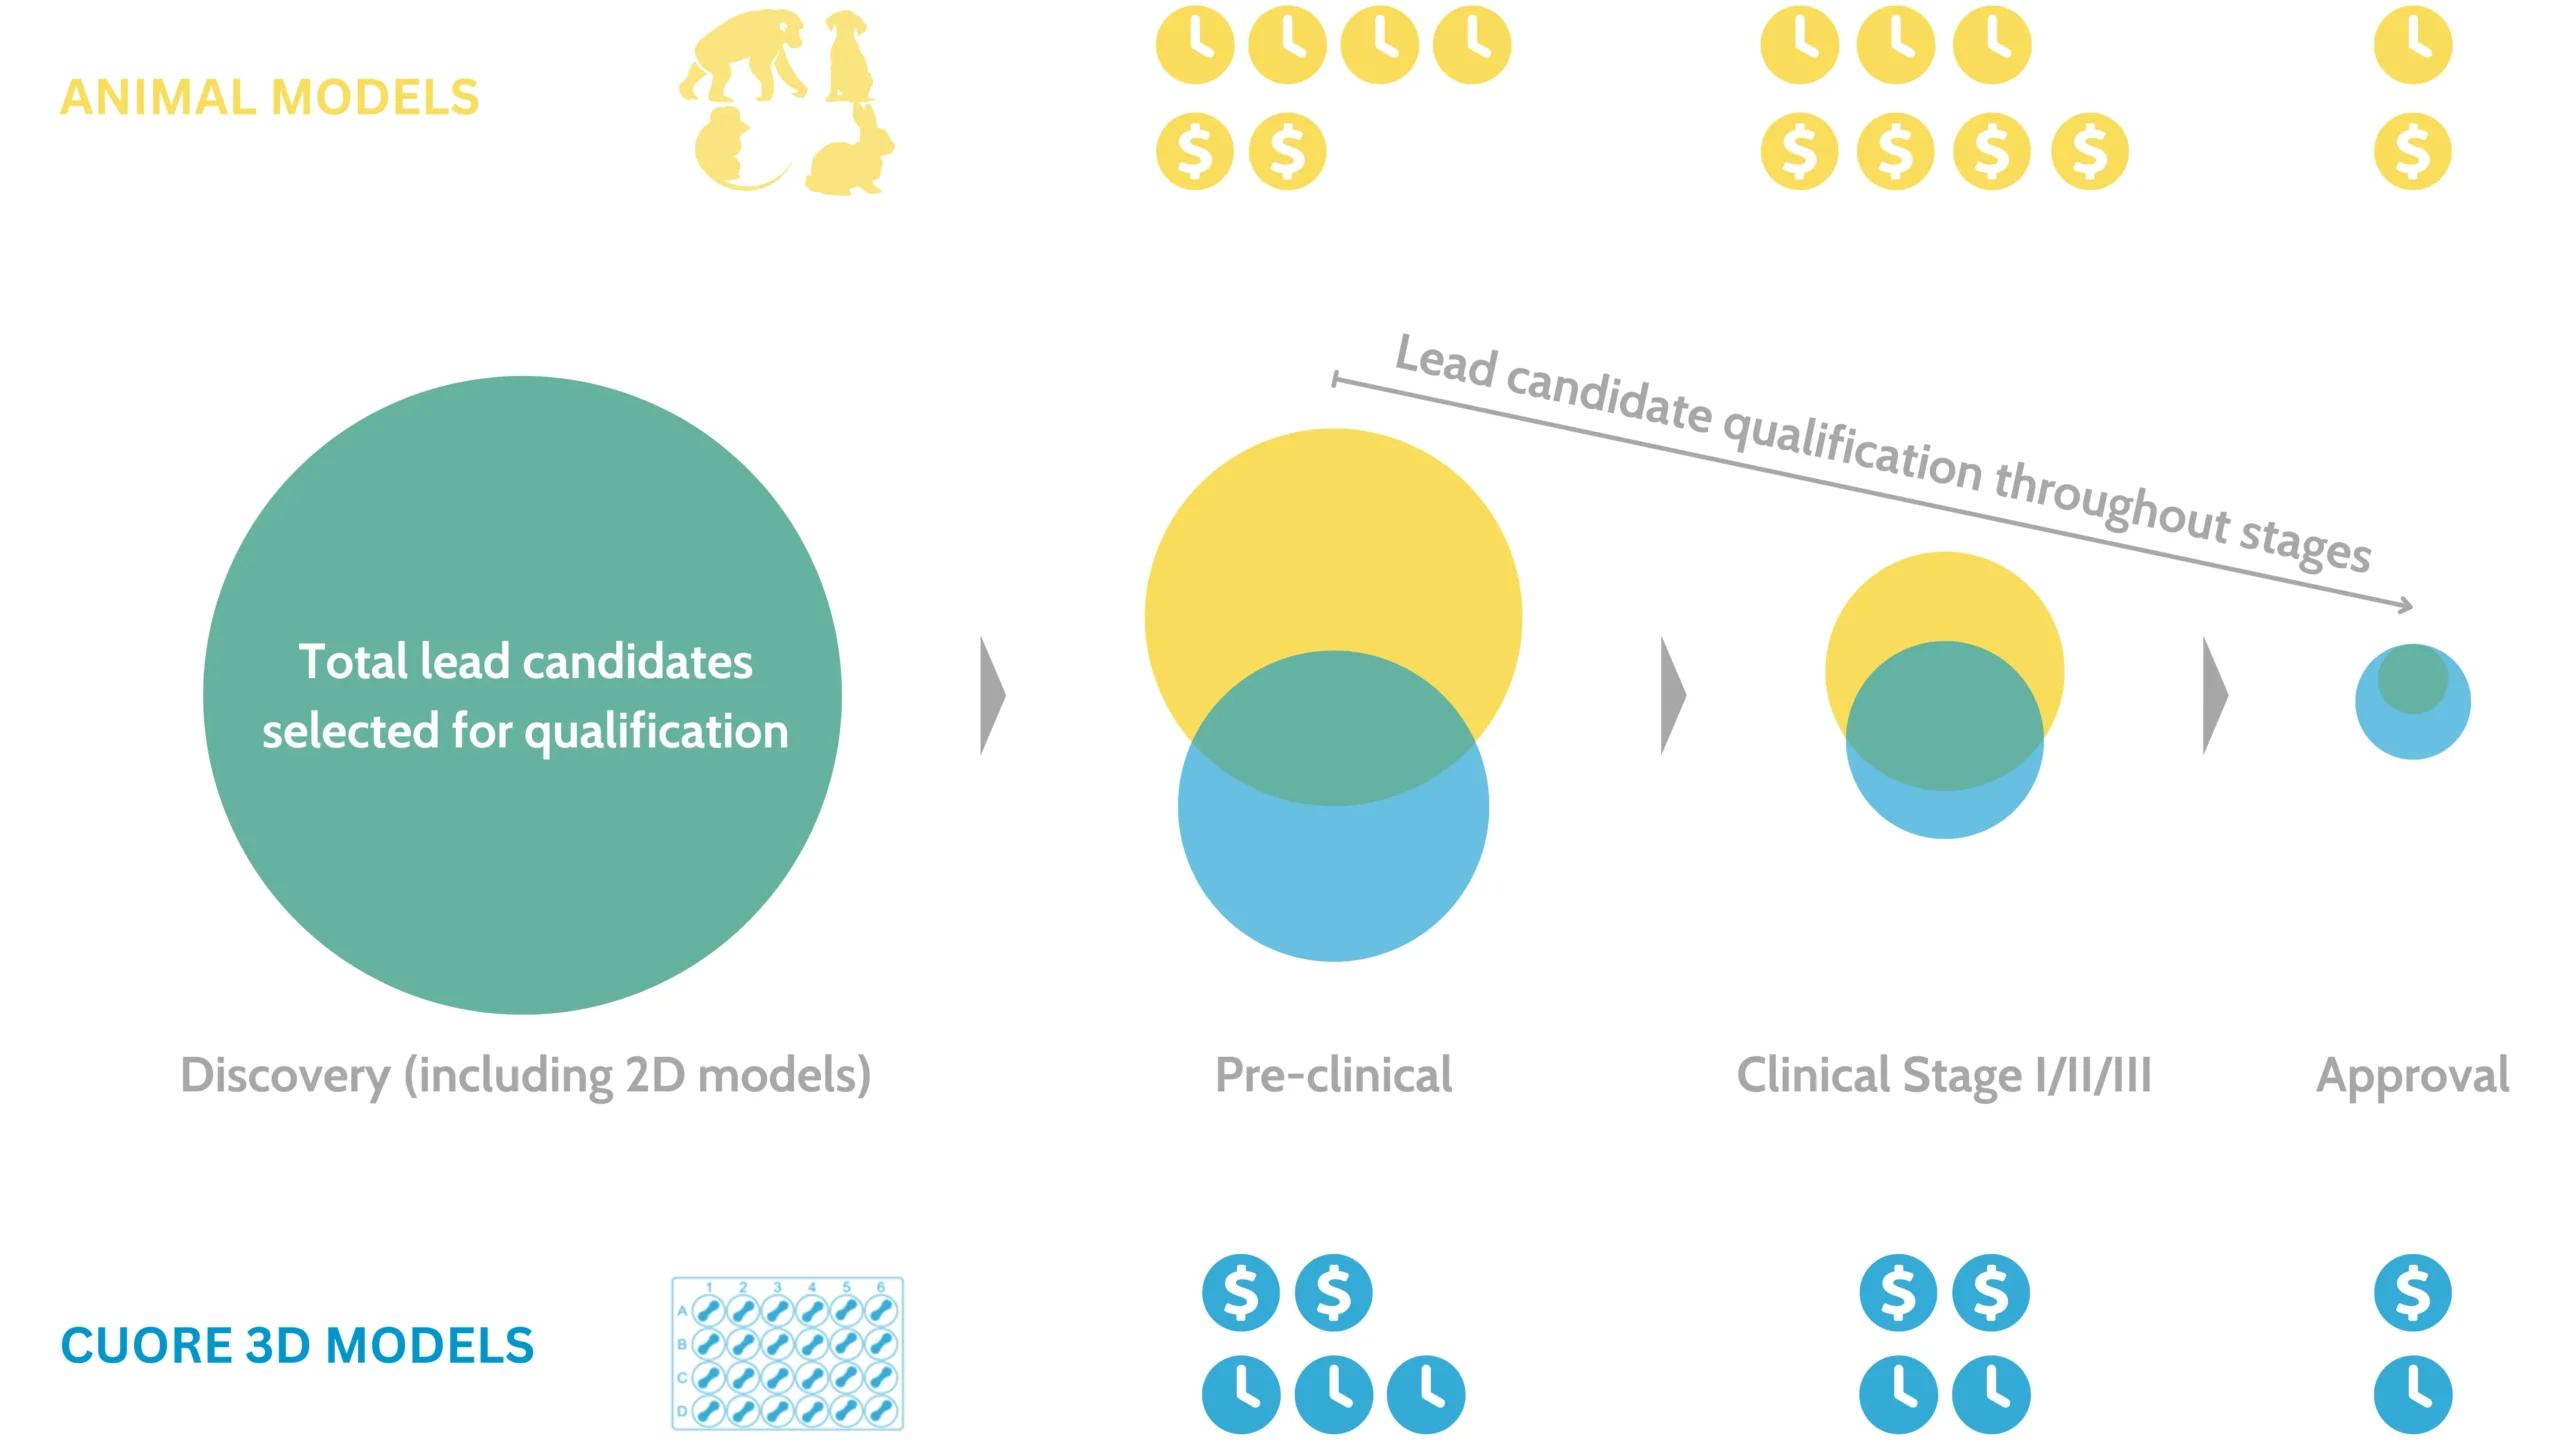 A diagram showing the stages of lead candidate qualification for neuromuscular disorder research. It compares animal models and CUORE 3D models from discovery to approval stages, highlighting costs and efficiency.